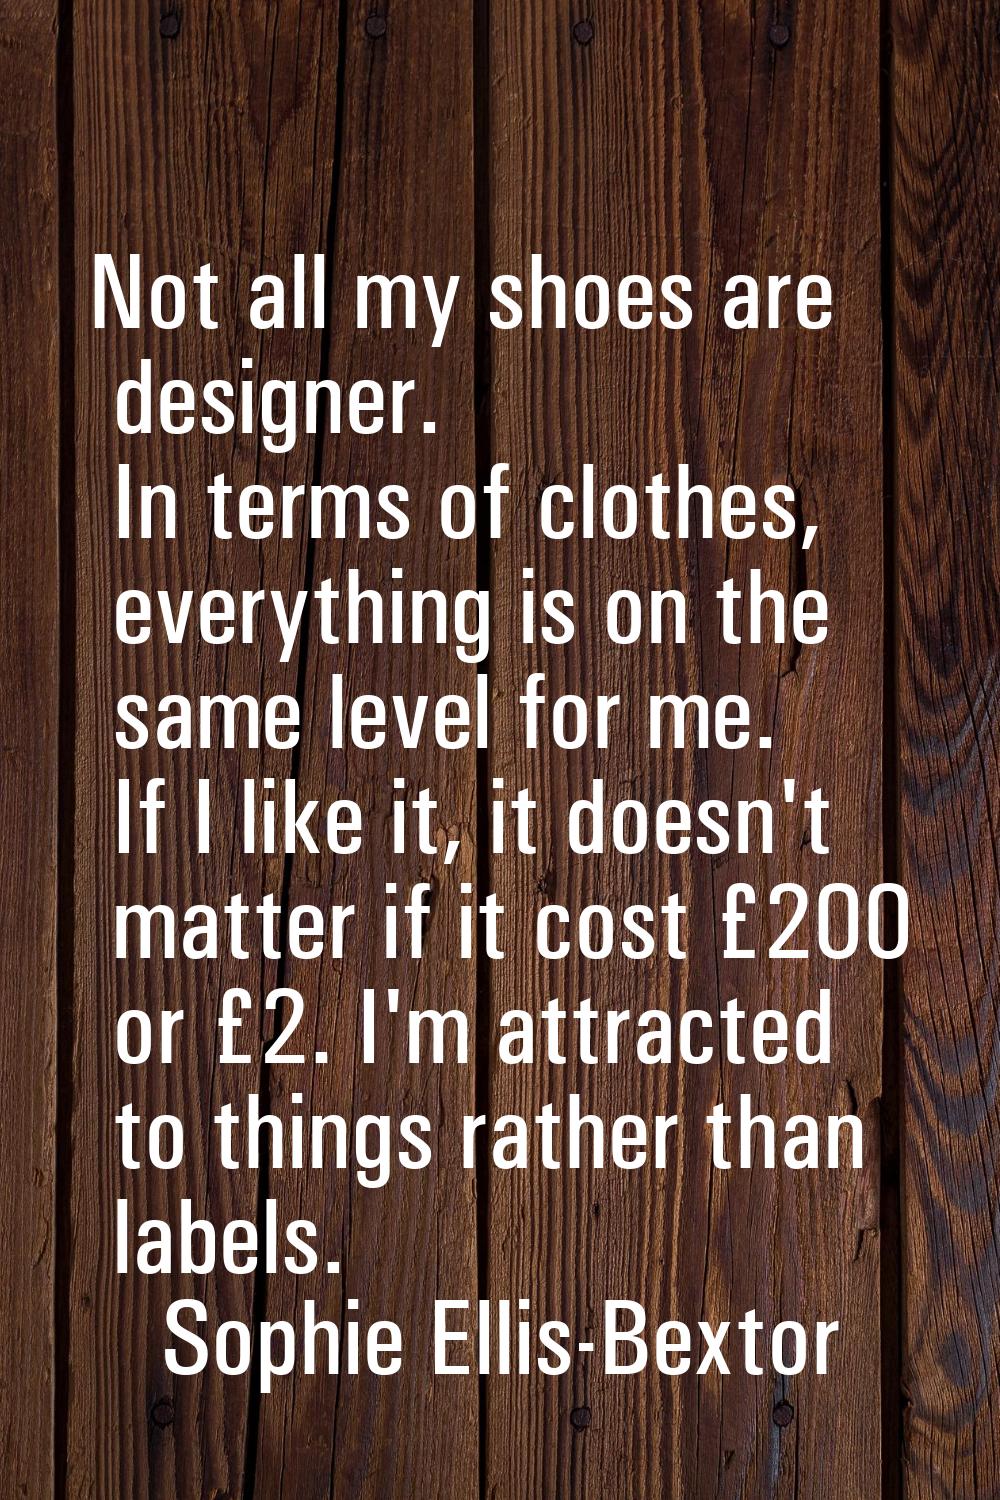 Not all my shoes are designer. In terms of clothes, everything is on the same level for me. If I li